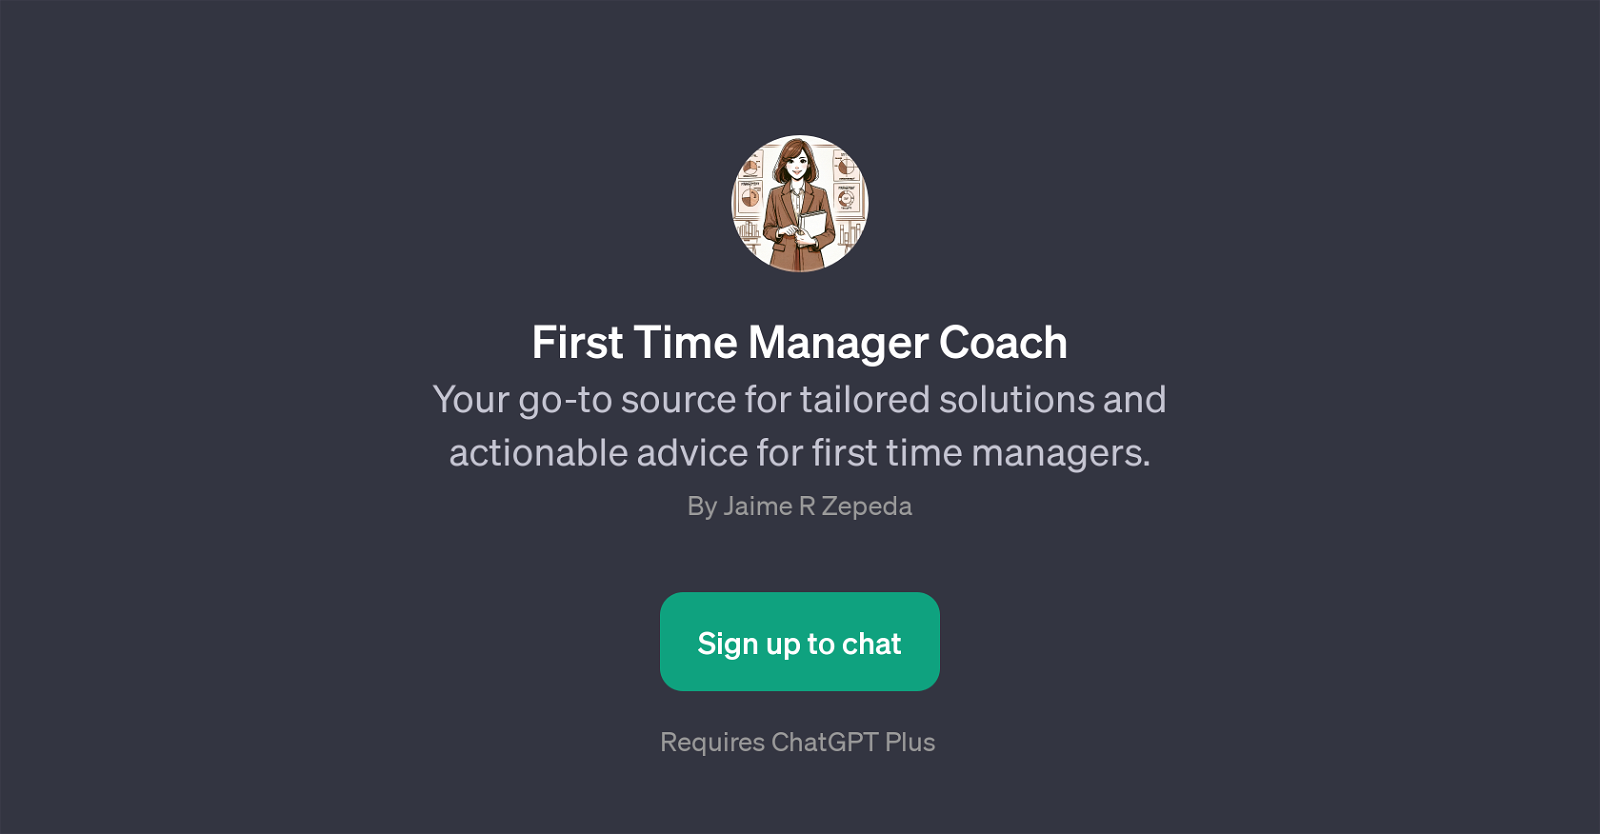 First Time Manager Coach website